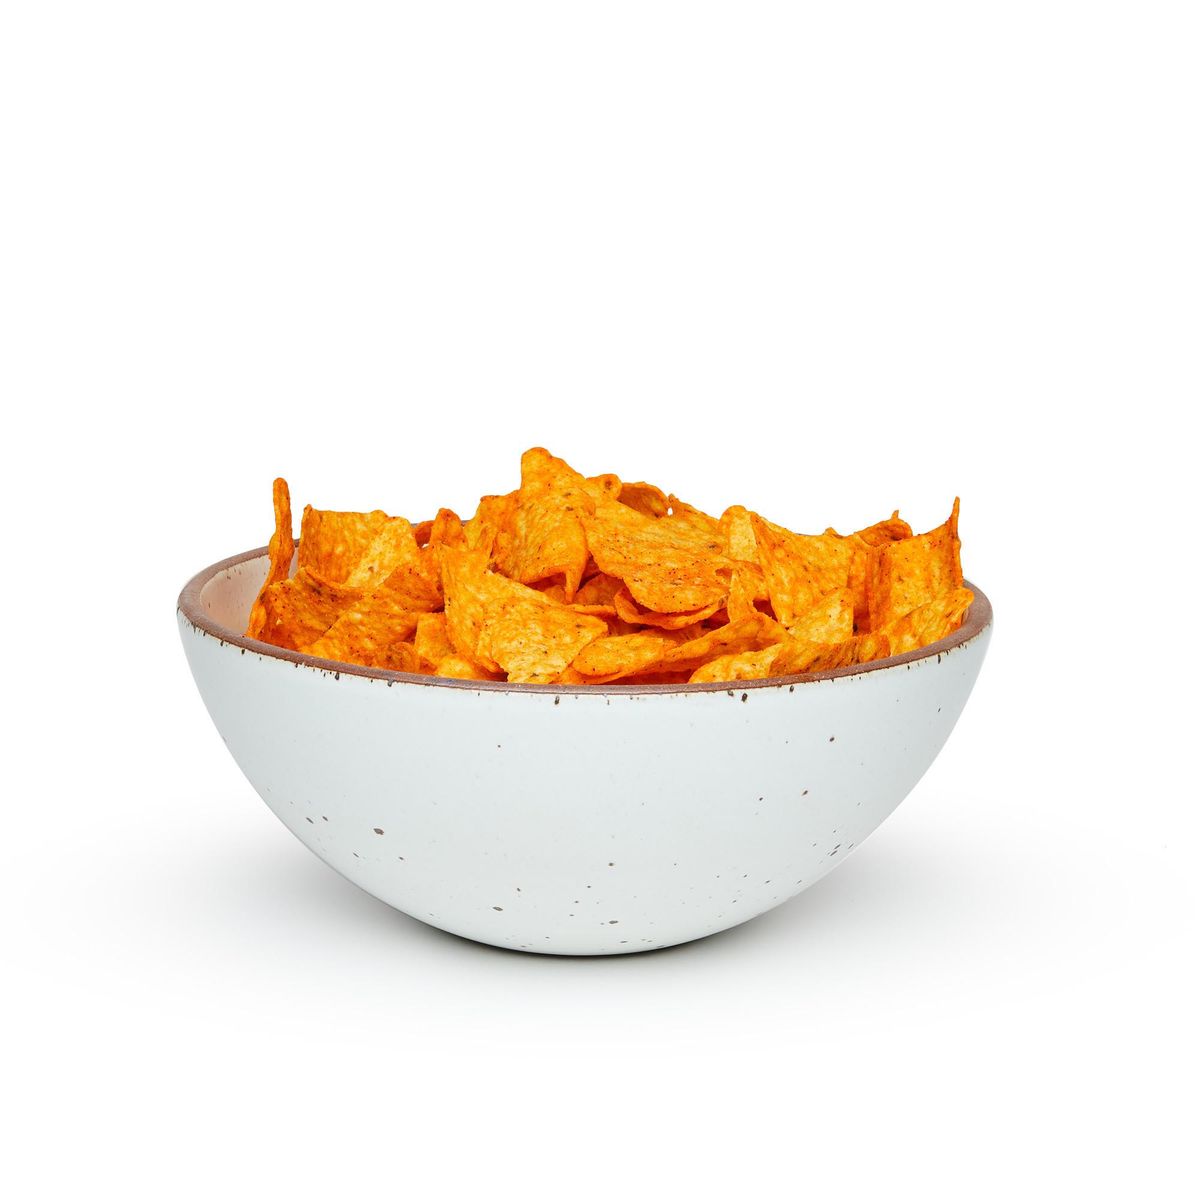 A large rounded ceramic bowl in a cool white color featuring iron speckles and an unglazed rim, filled with nacho cheese chips